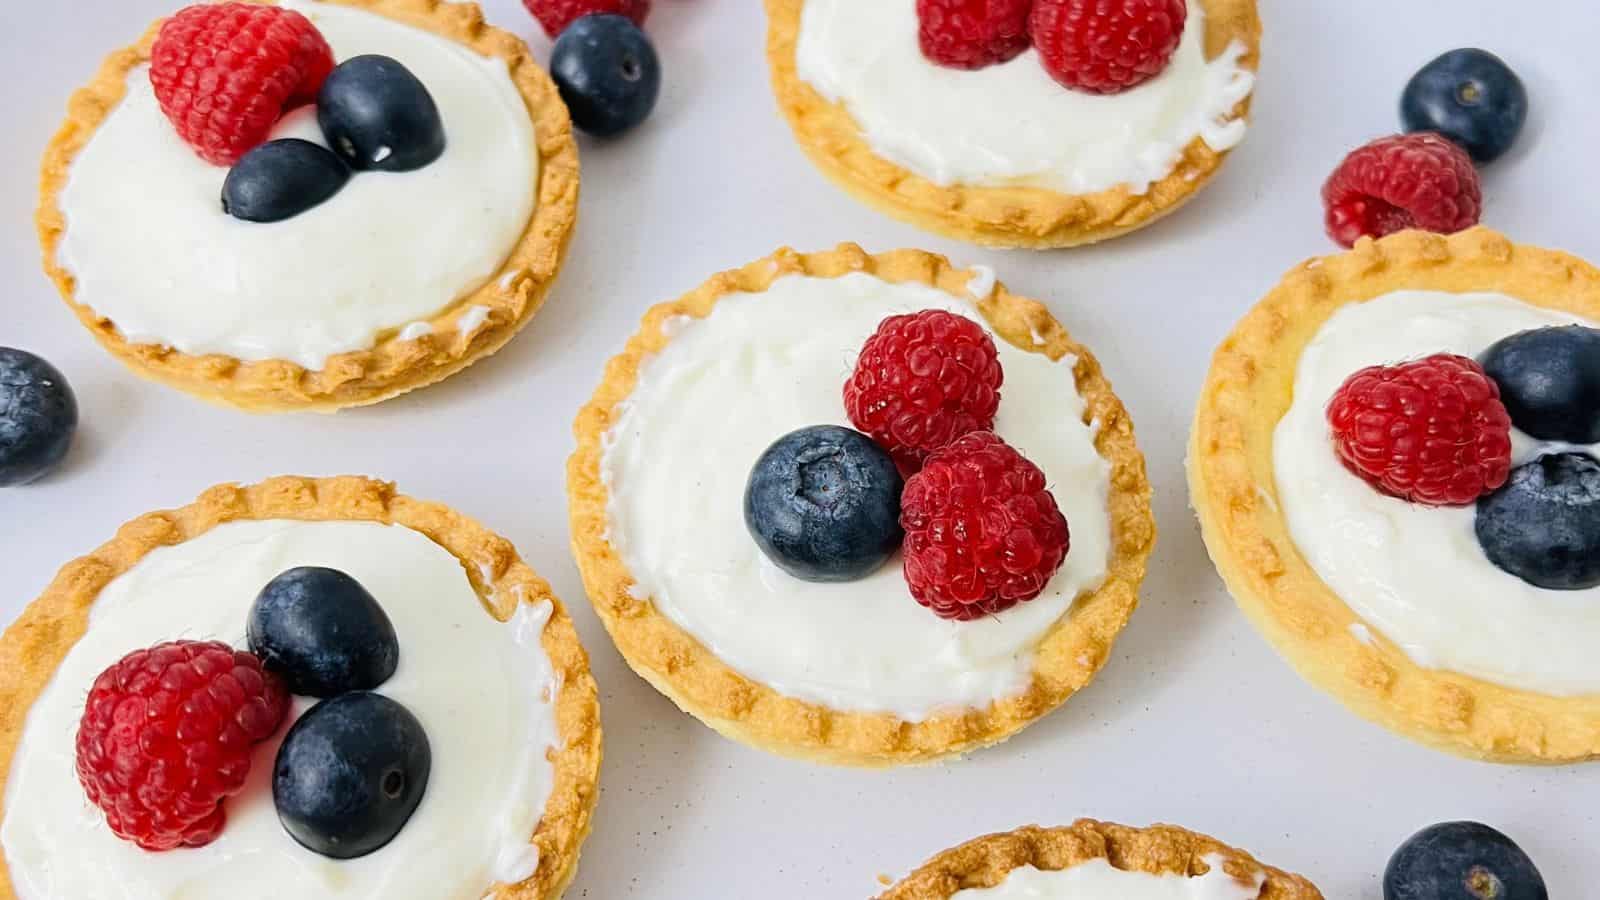 Mini tartlets with creamy filling, topped with fresh raspberries and blueberries, arranged on a white surface.